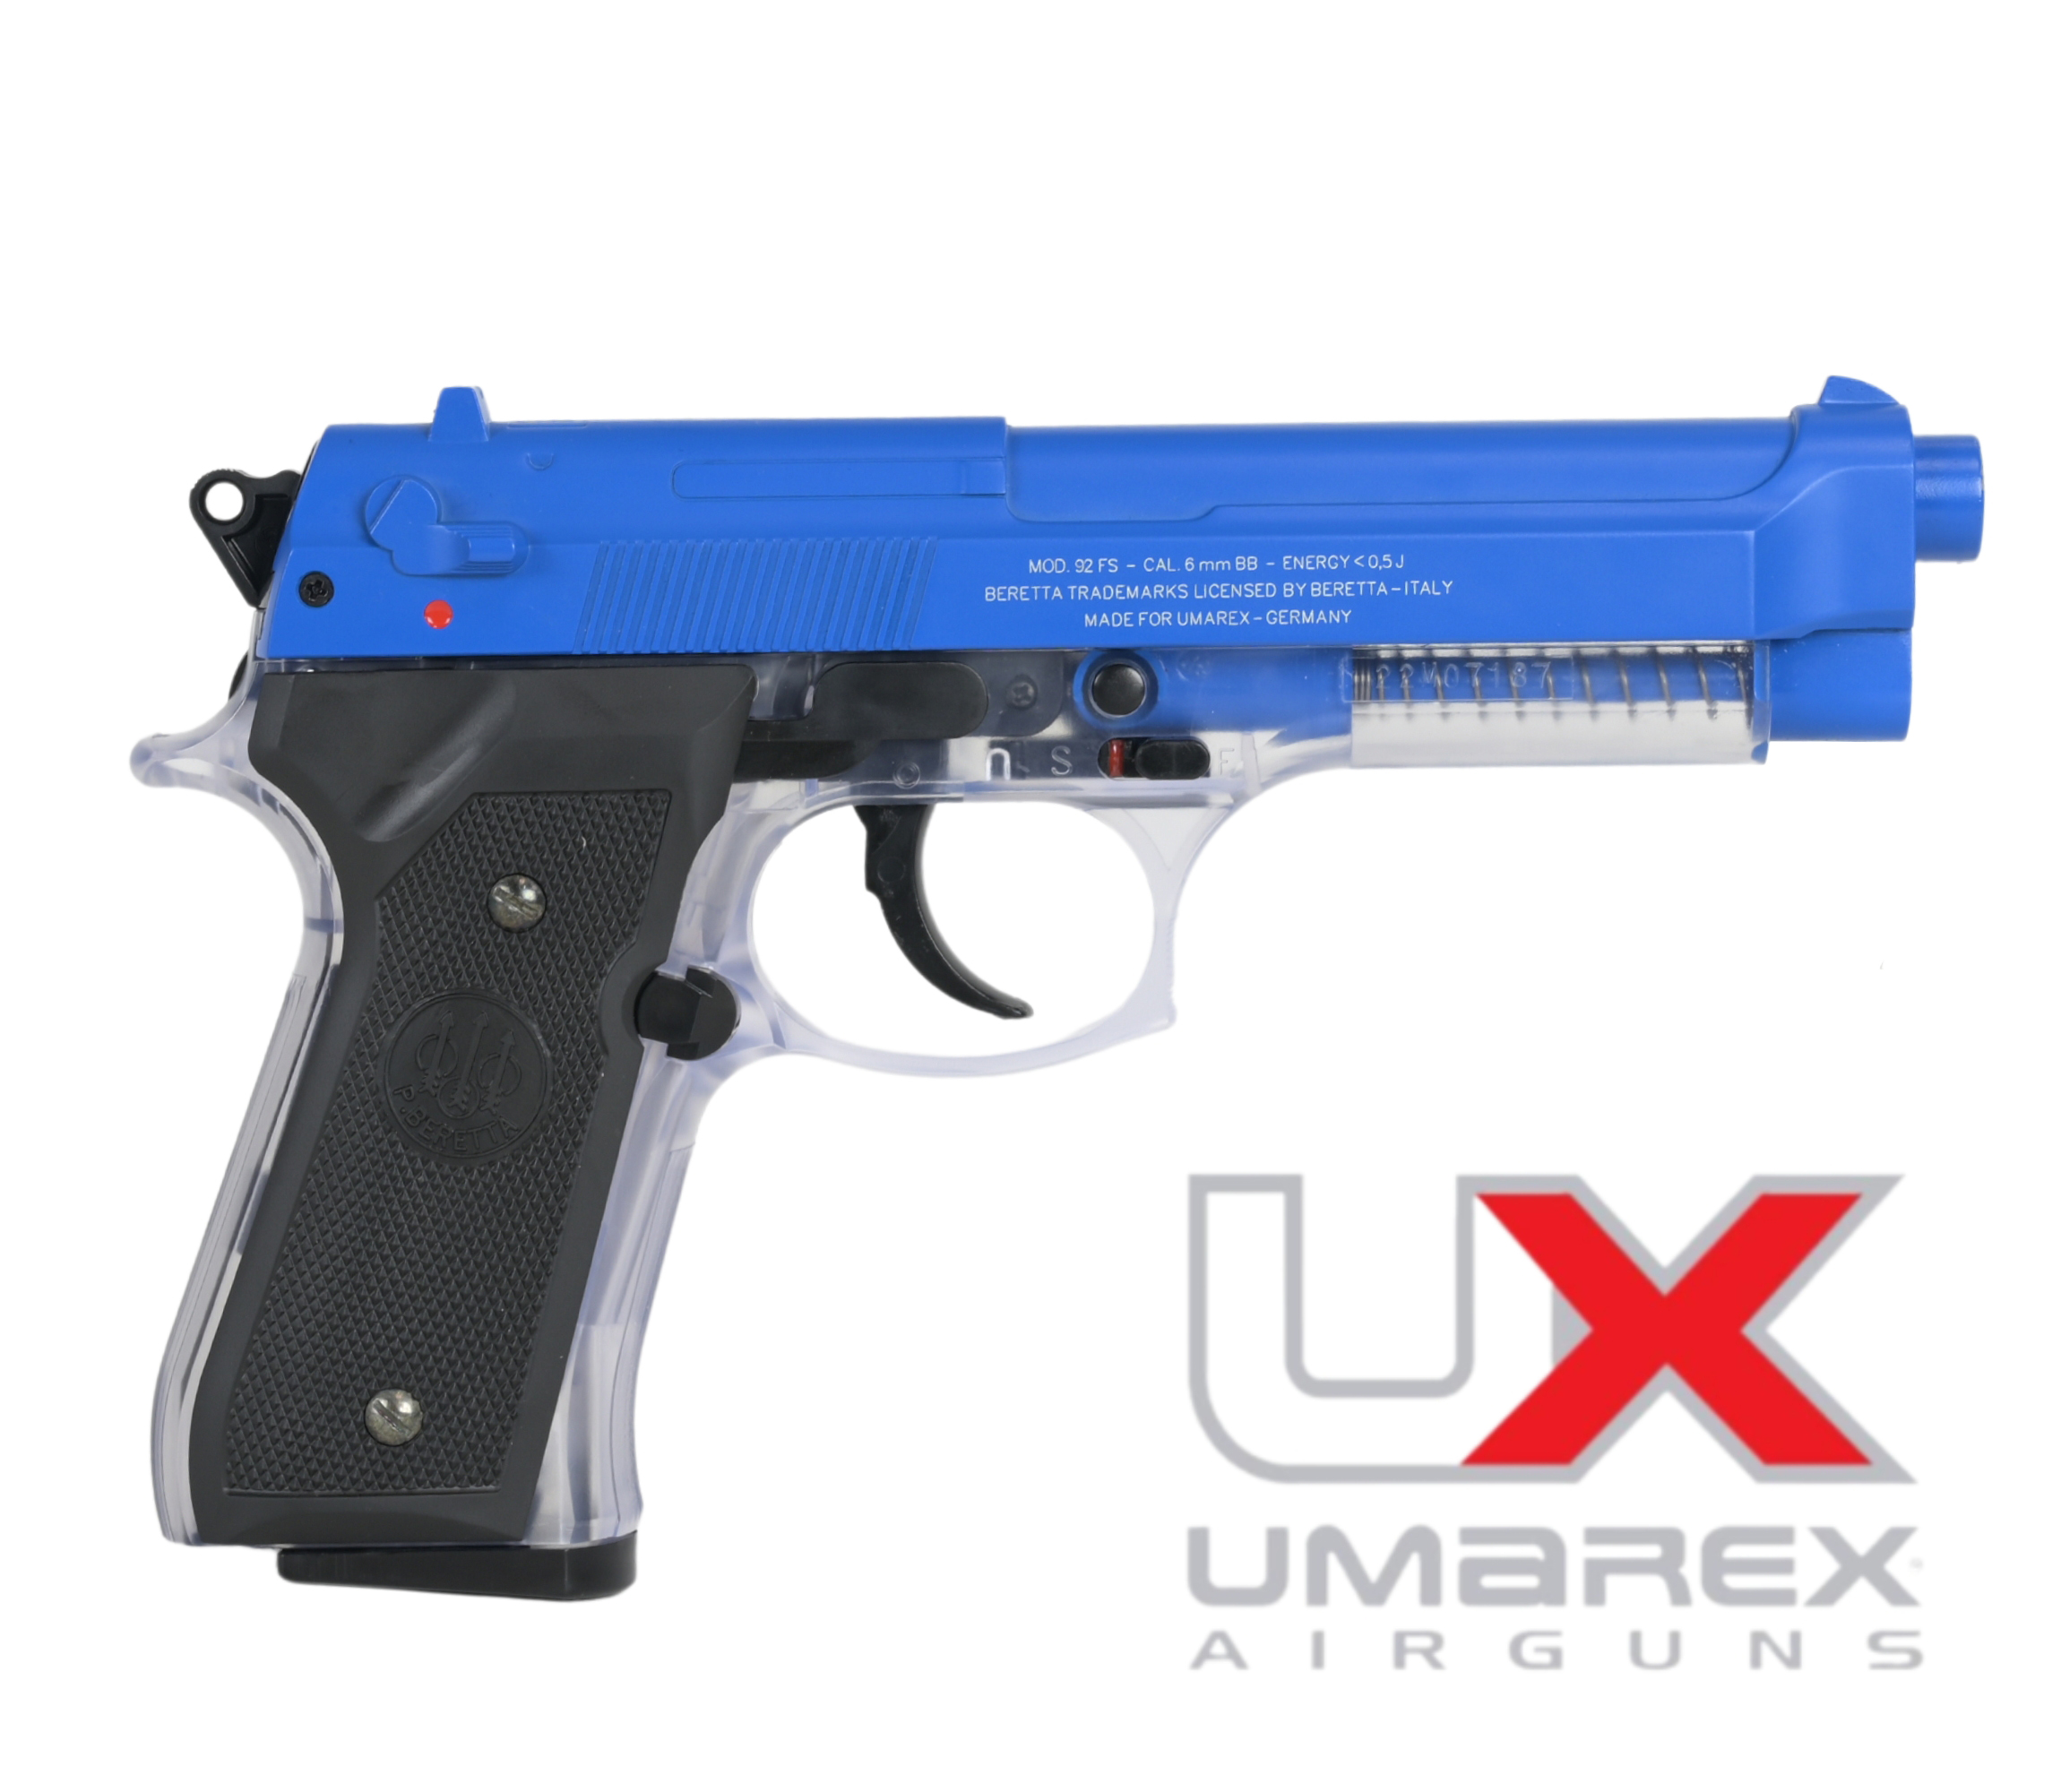 Umarex 92FS 6mm Plastic Airsoft Pistol 240fps - Outdoor Outfitters -  Supplier of Hunting and Outdoor Equipment